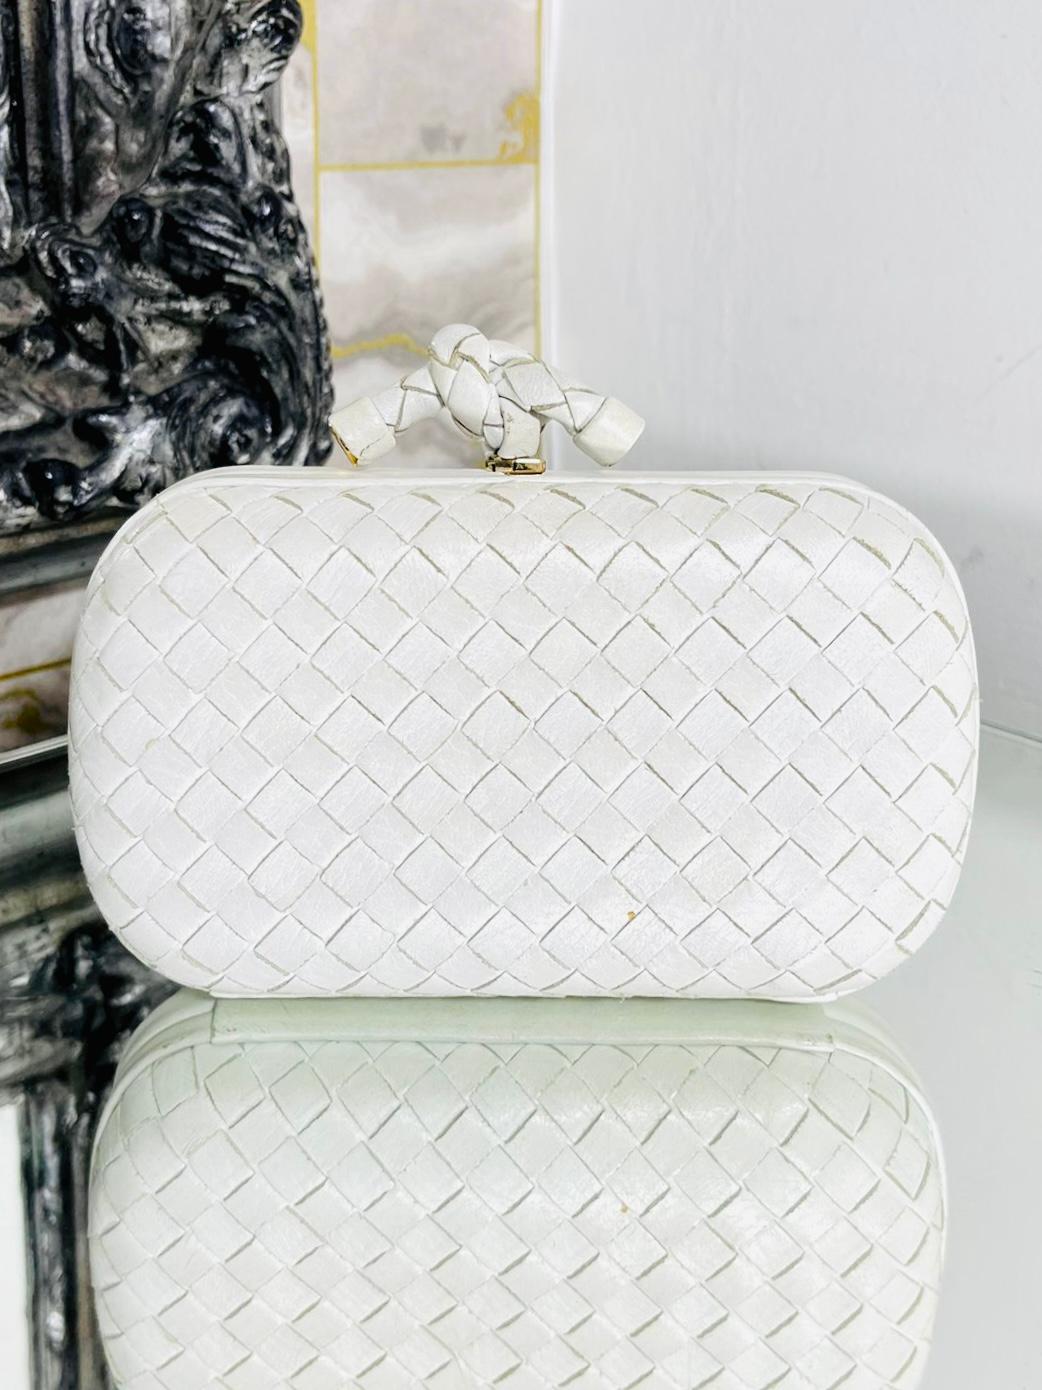 Bottega Veneta Leather Top Knot Clutch Bag

White leather clutch bag designed with the brand's signature Intrecciato weave crafted Featuring signature knot twisted closure with gold engraved logo.

Size – Height 10cm, Width 16cm, Depth